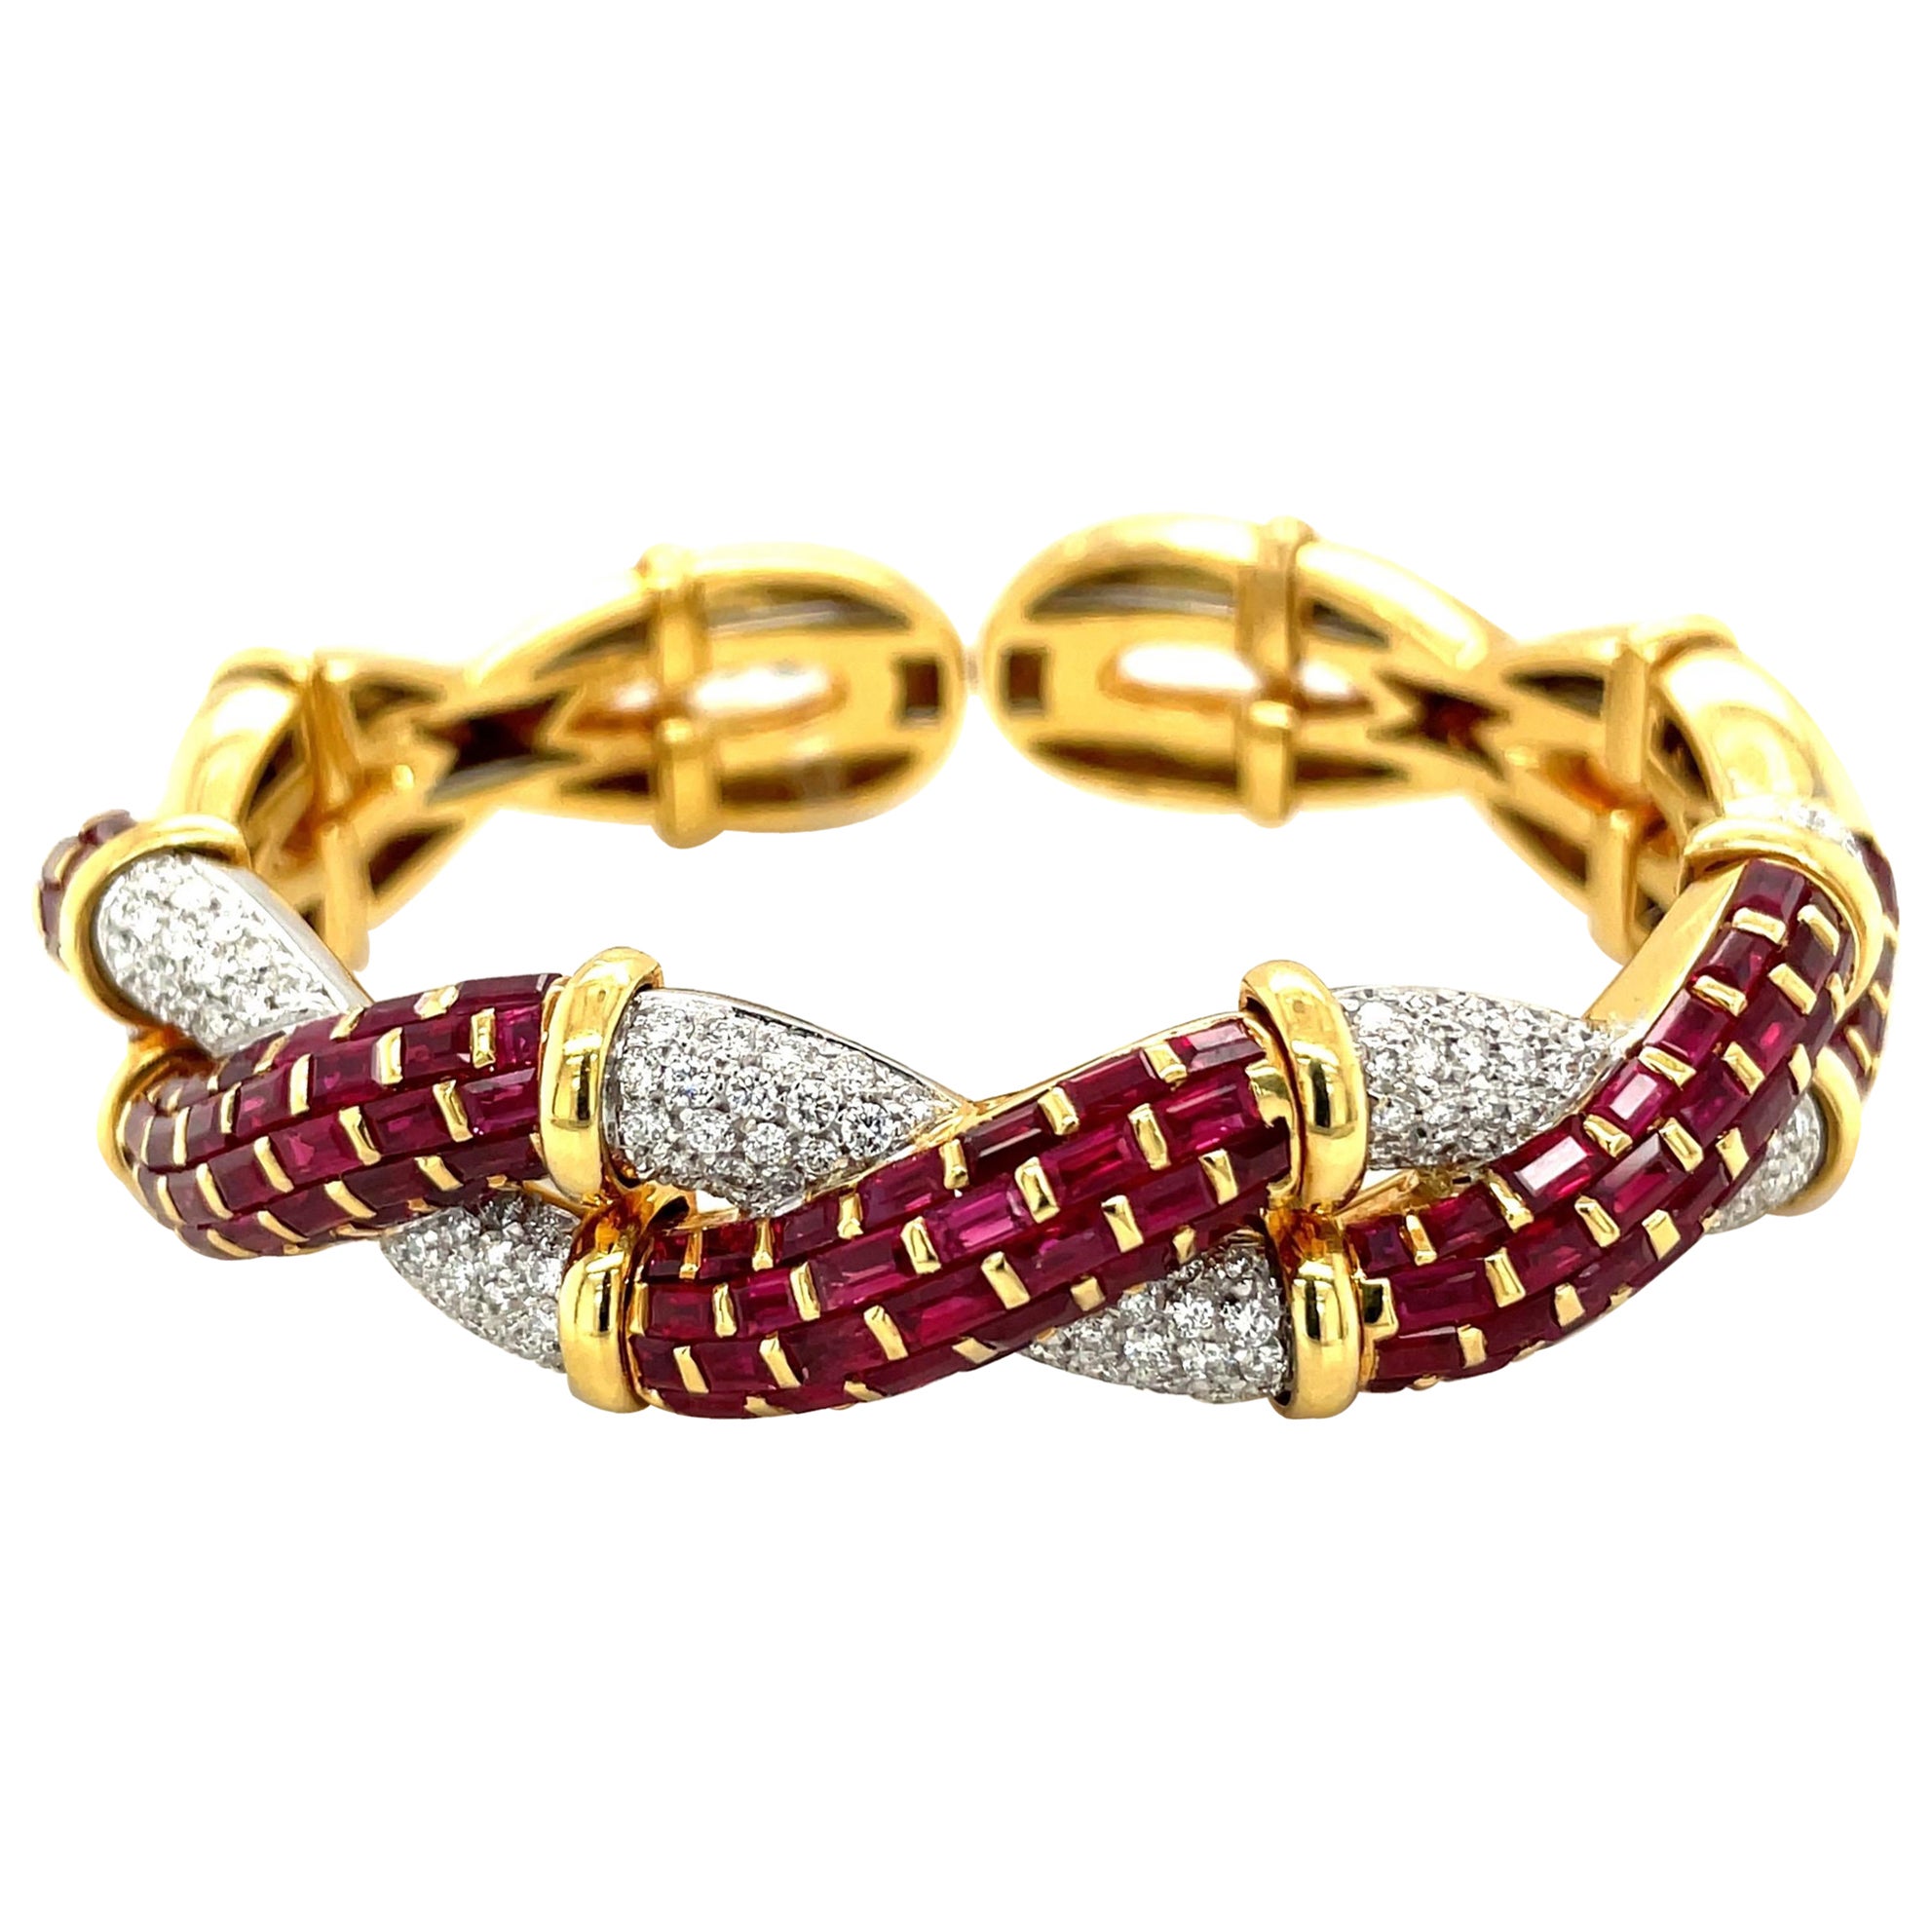 R.C.M. 18KT Yellow Gold 13.39Ct Ruby 1.70Ct Diamond Braided Cuff Bracelet For Sale